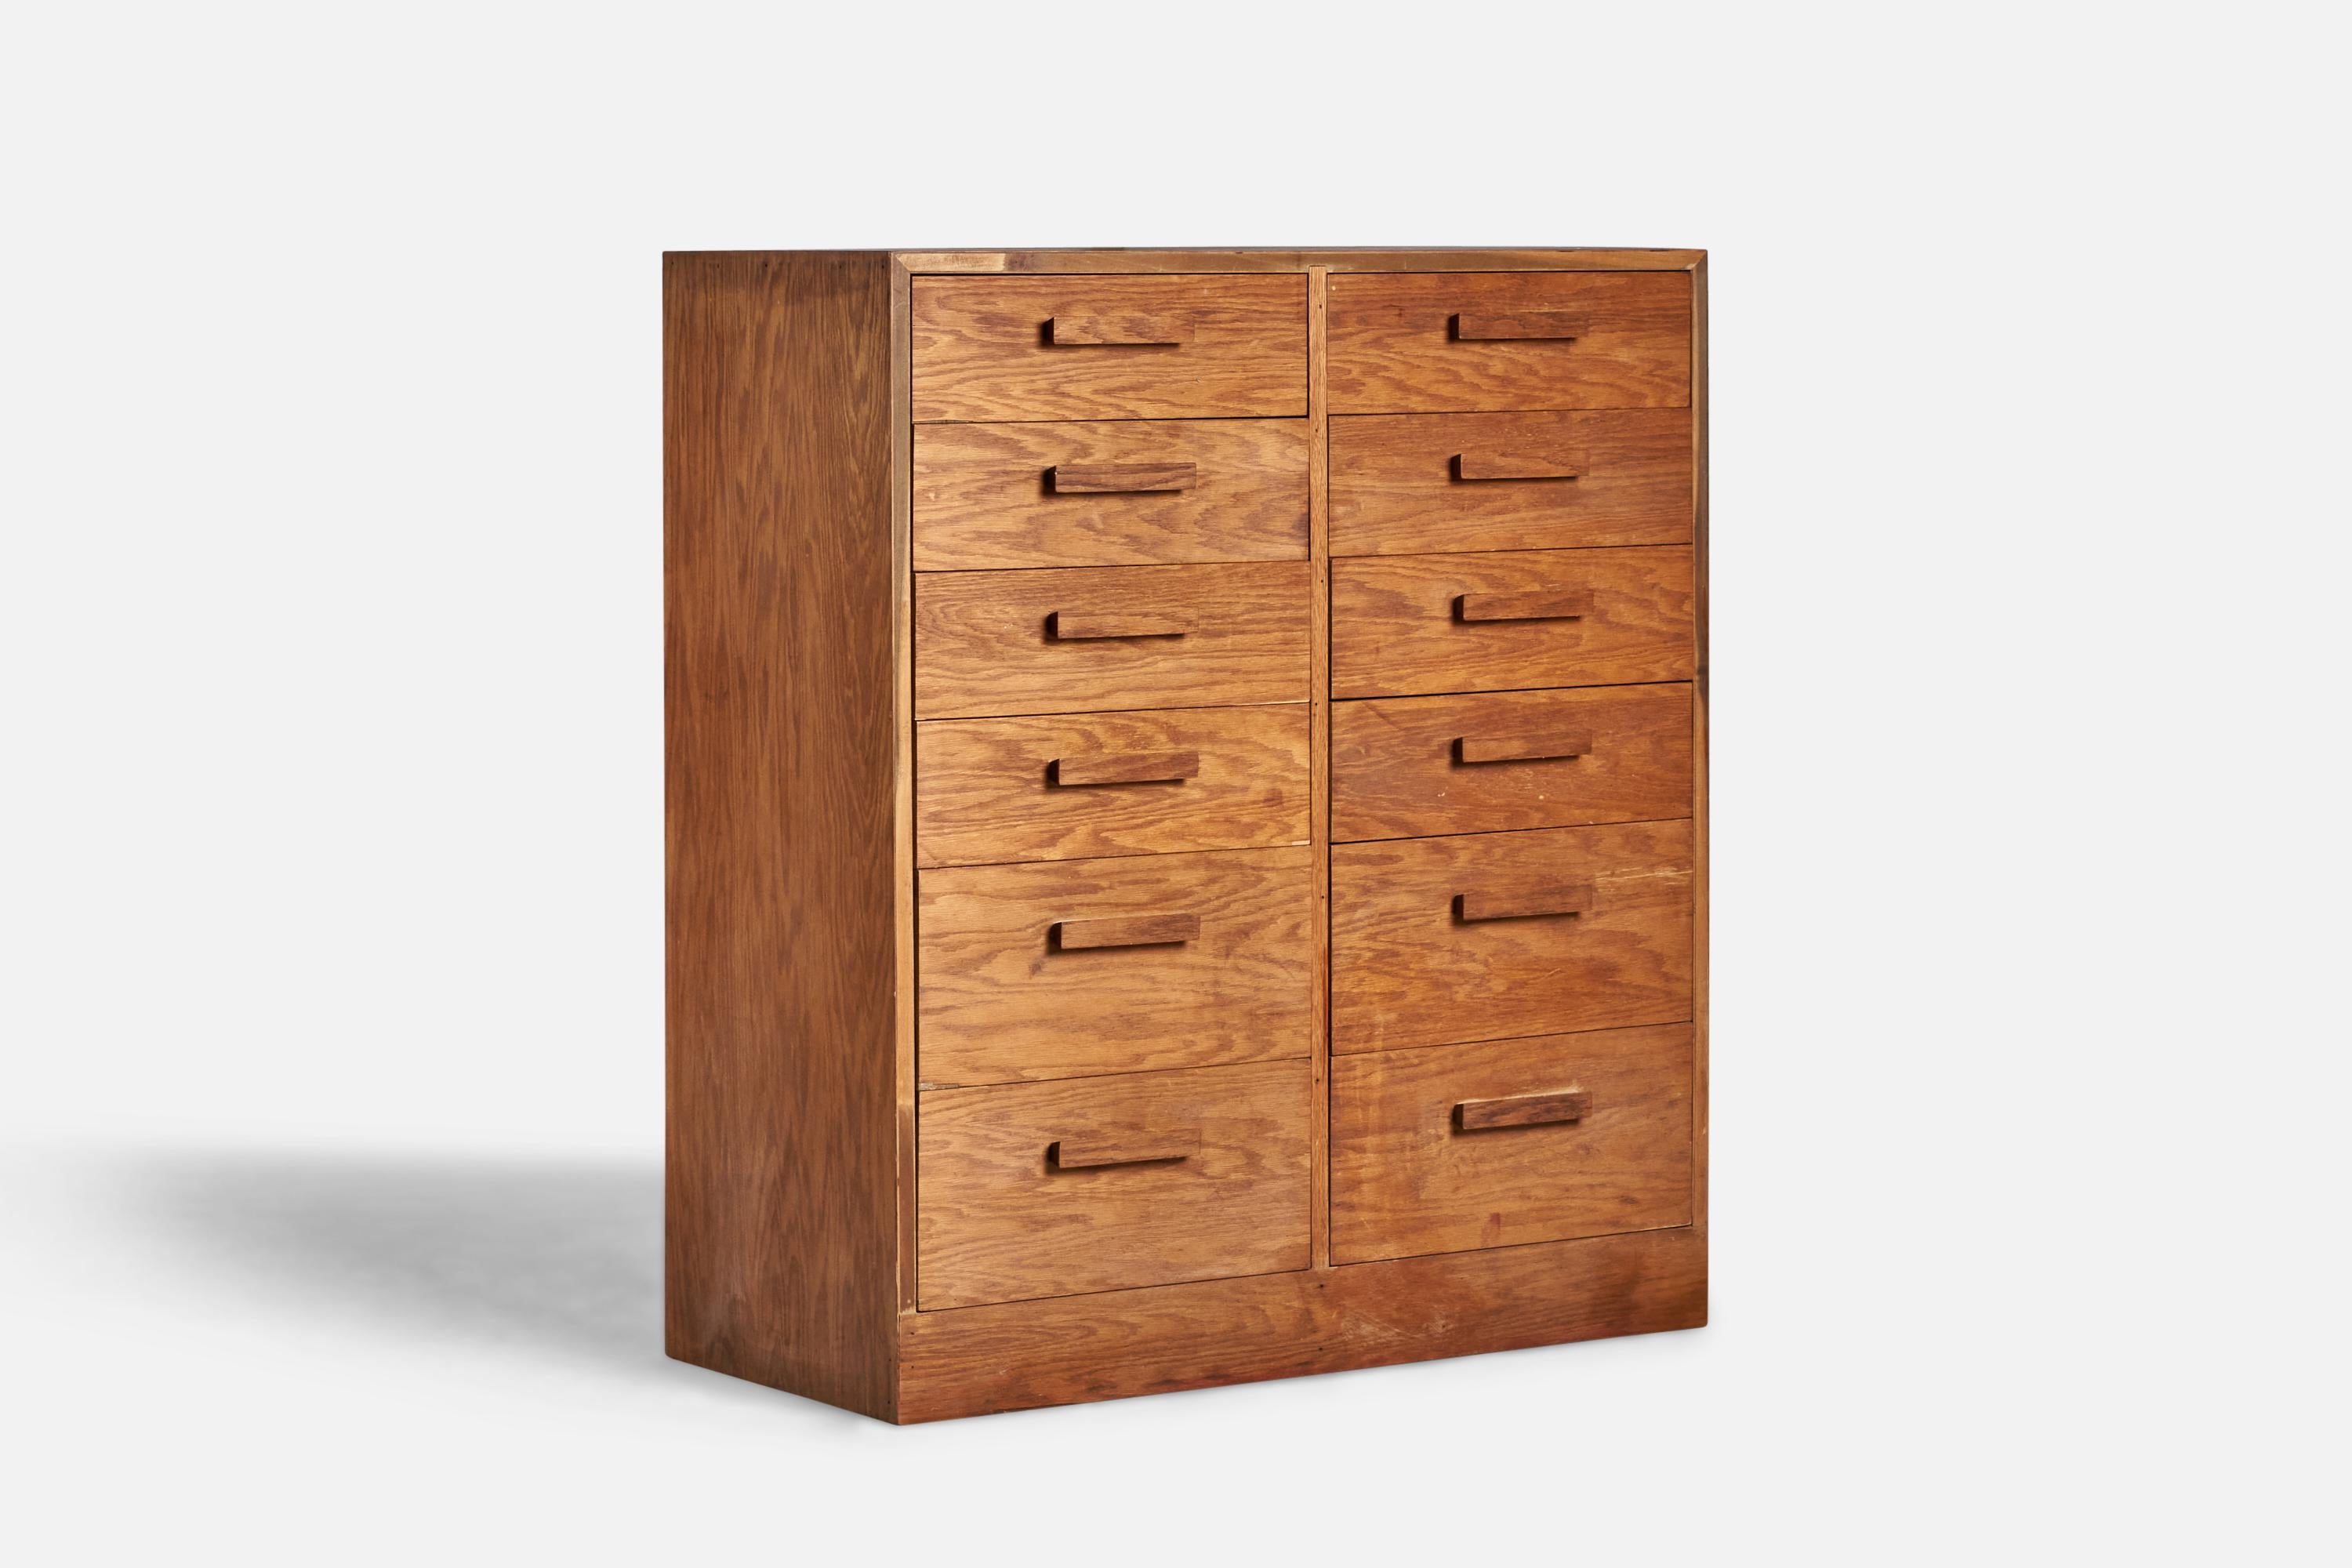 A stained oak dresser designed and produced in the US, c. 1930s.